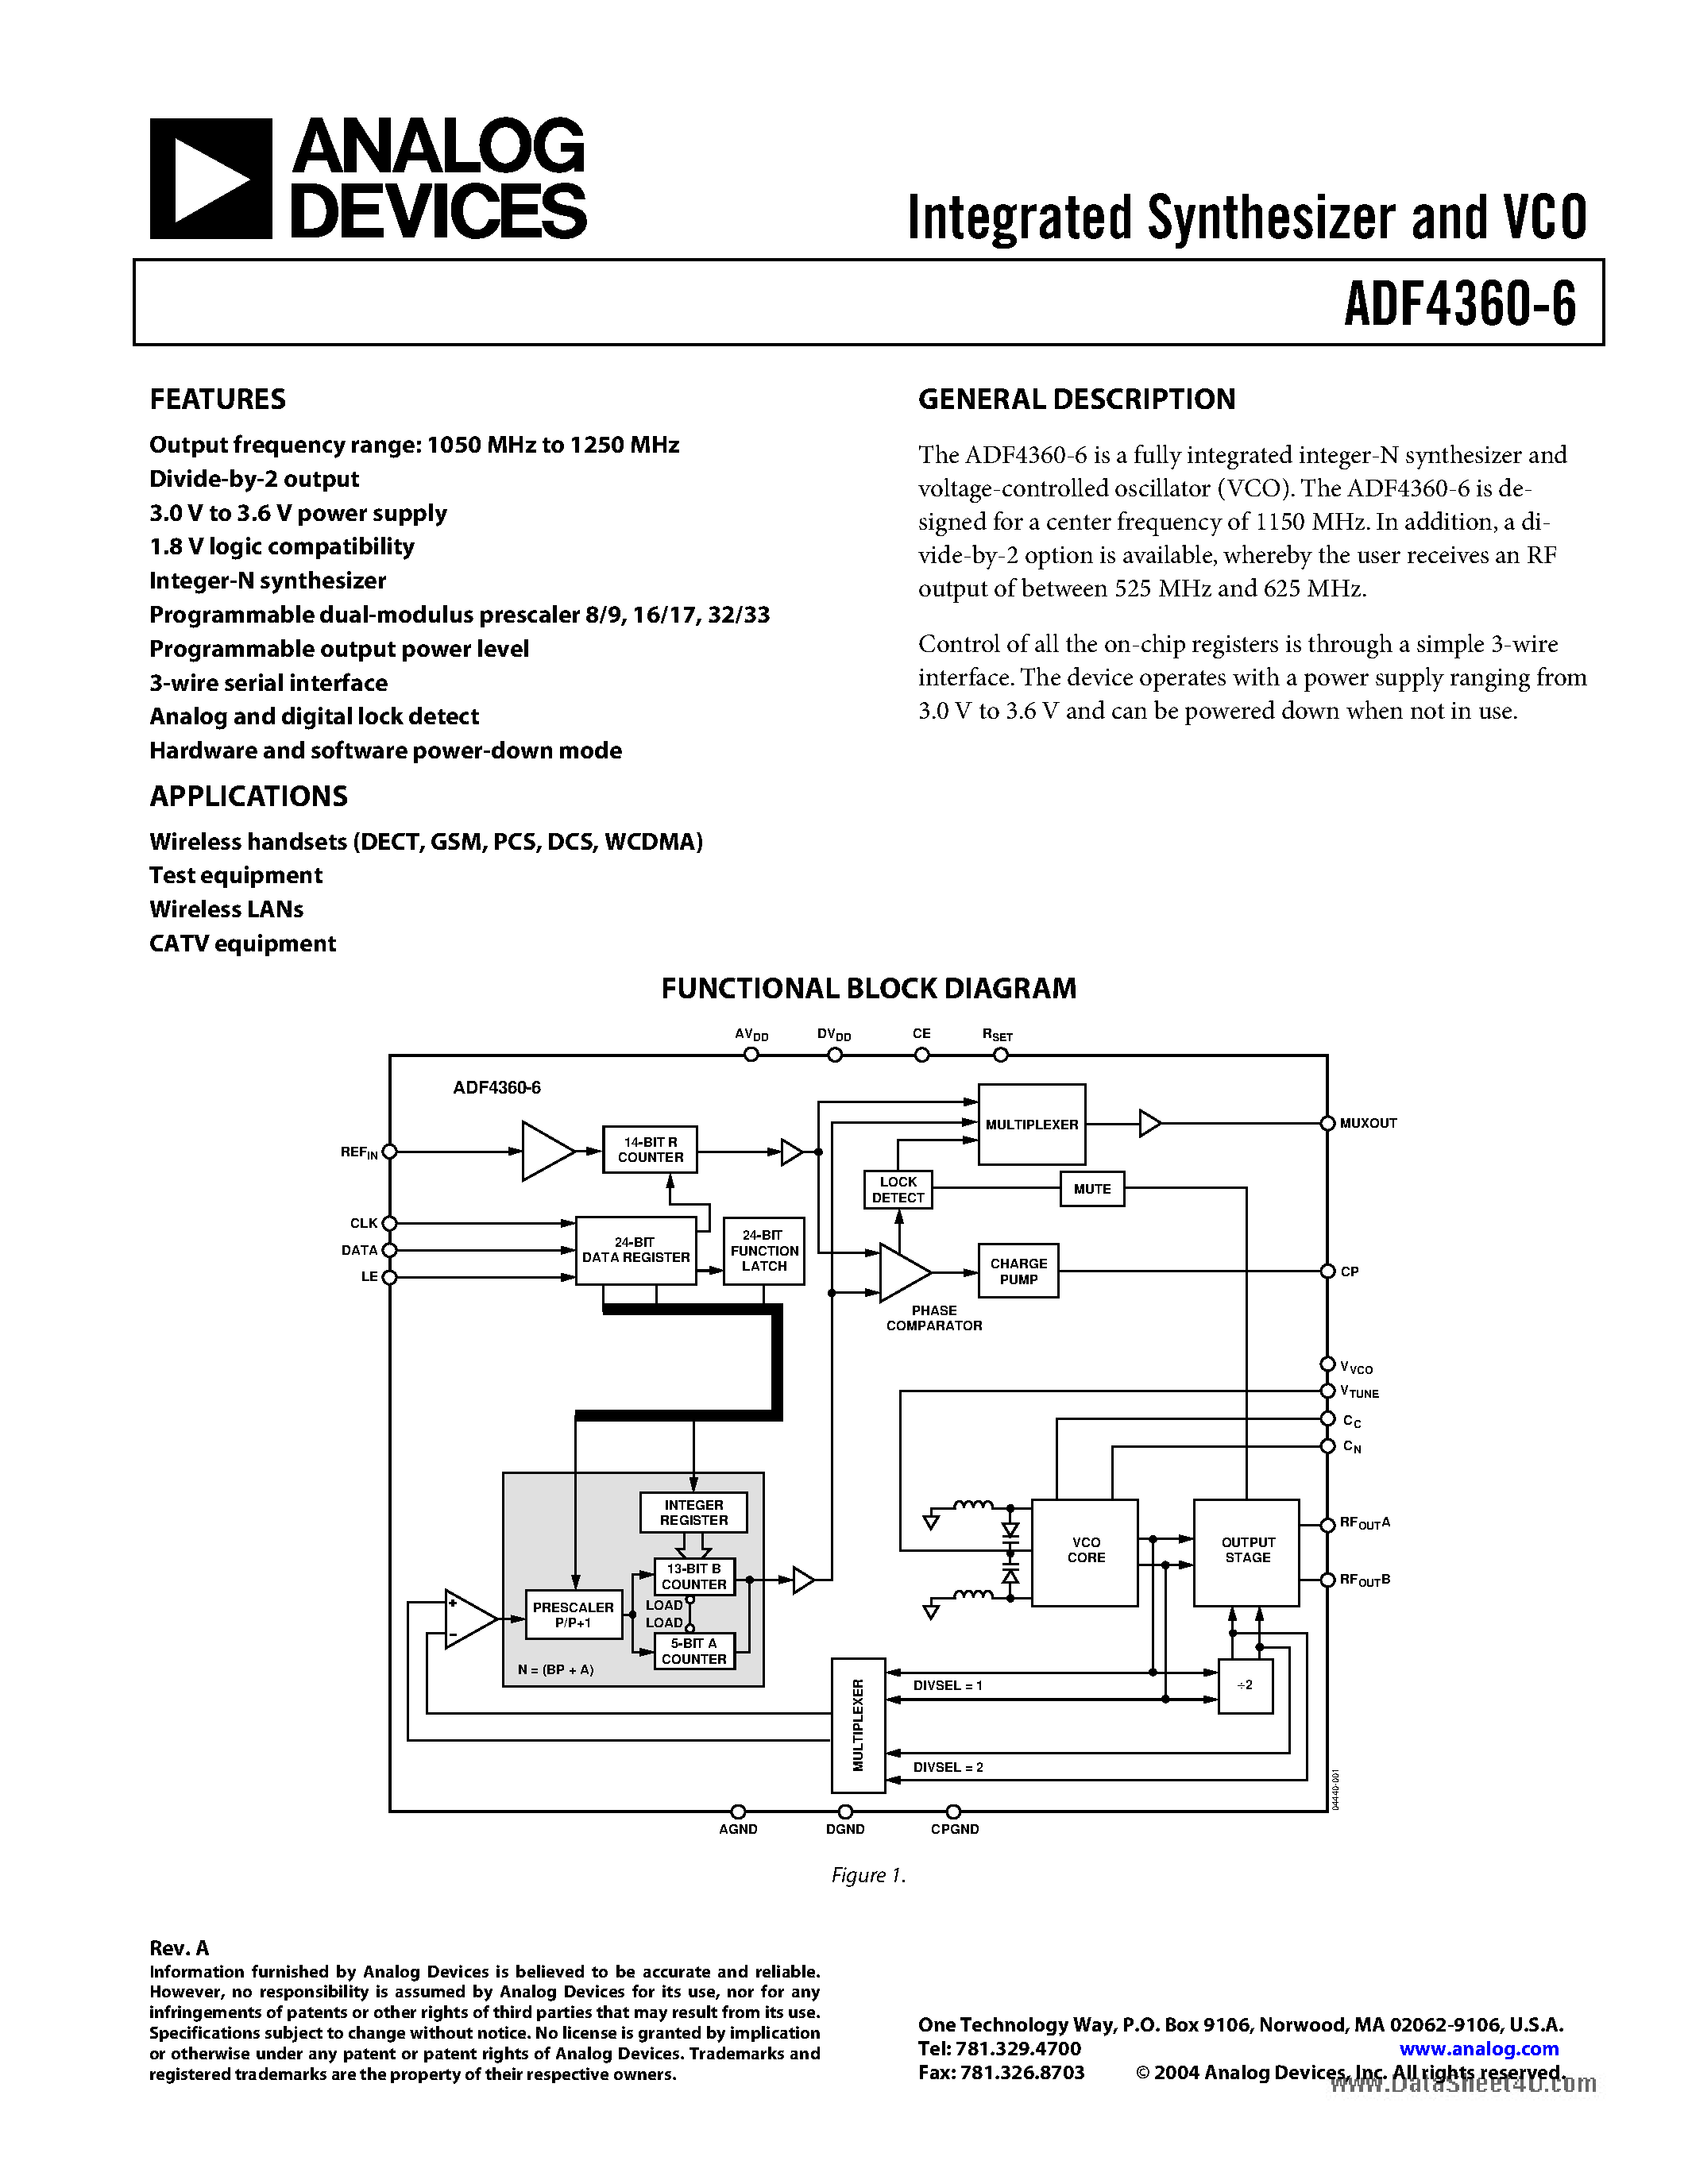 Даташит ADF4360-6 - Integrated Synthesizer and VCO страница 1